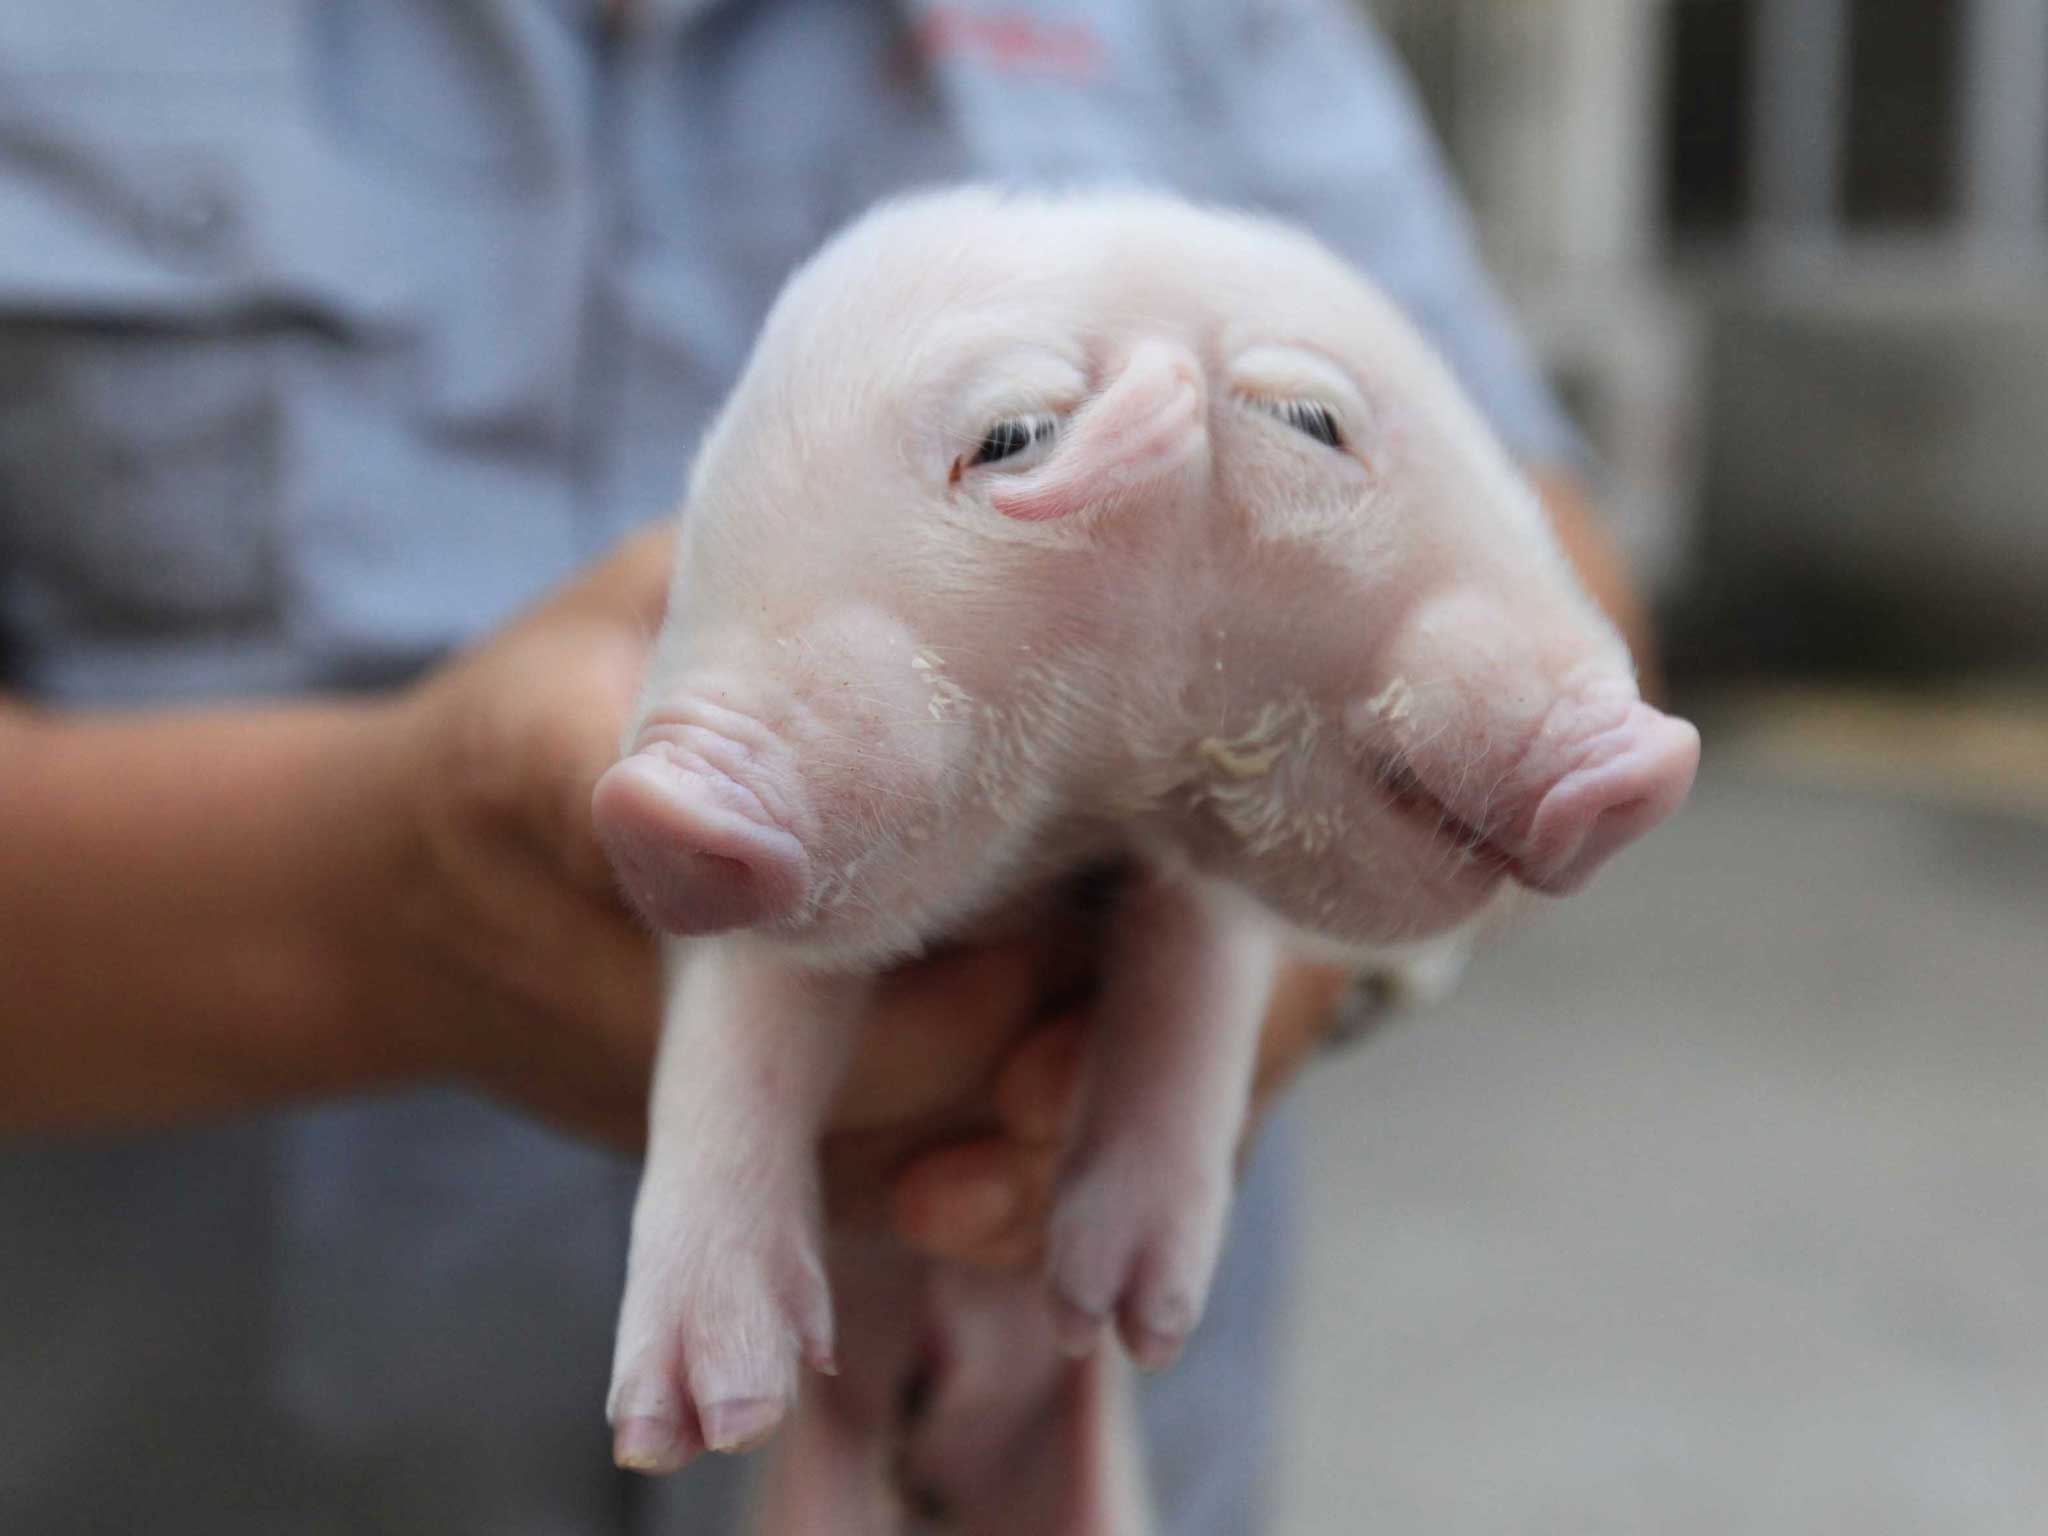 The piglet was discovered outside a temple